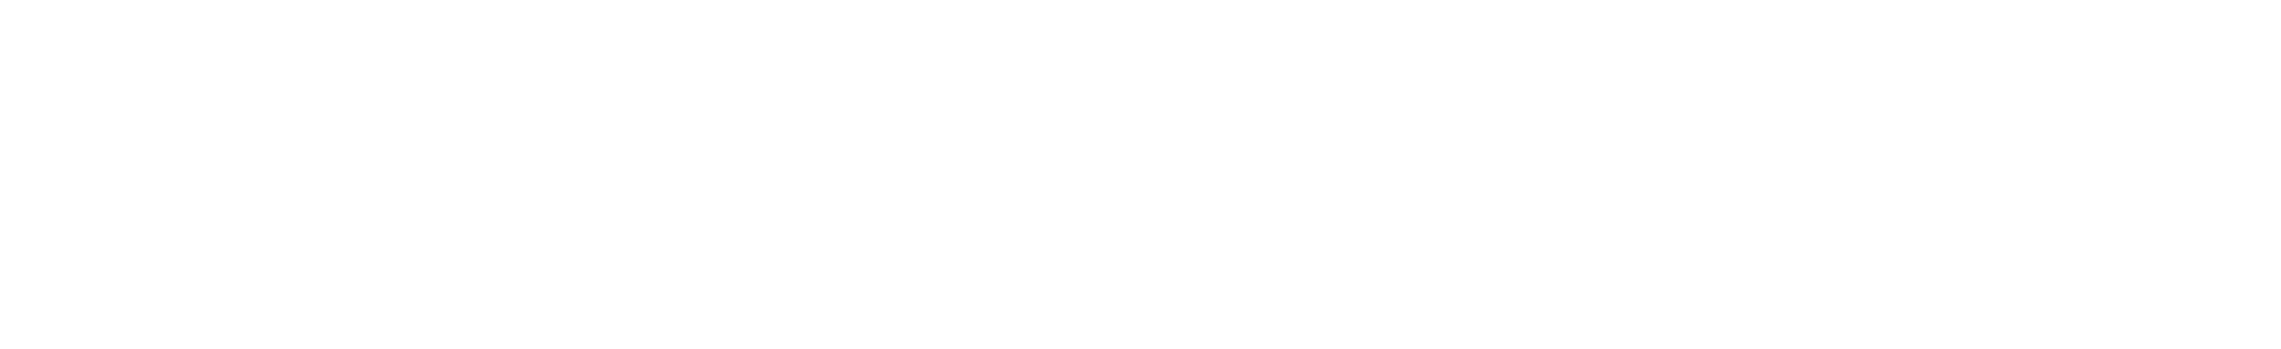 Classic Software Technology